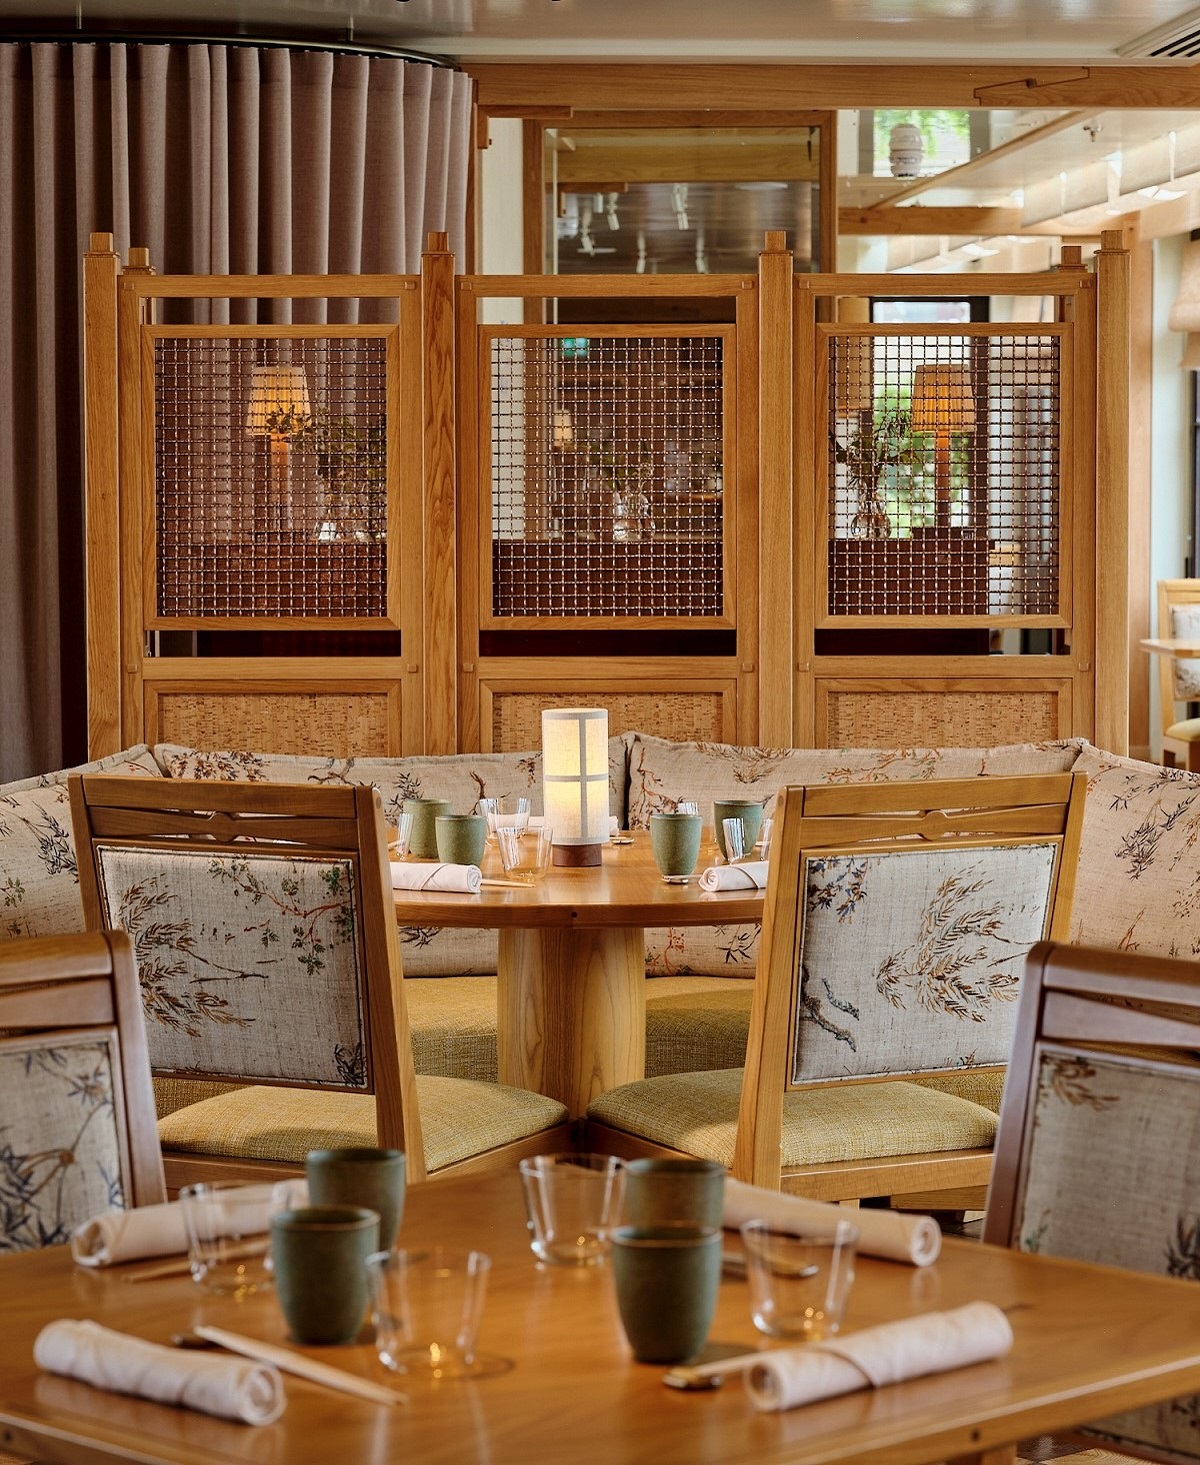 wooden panel and table detailing in the restaurant with japanese inspired fabric details